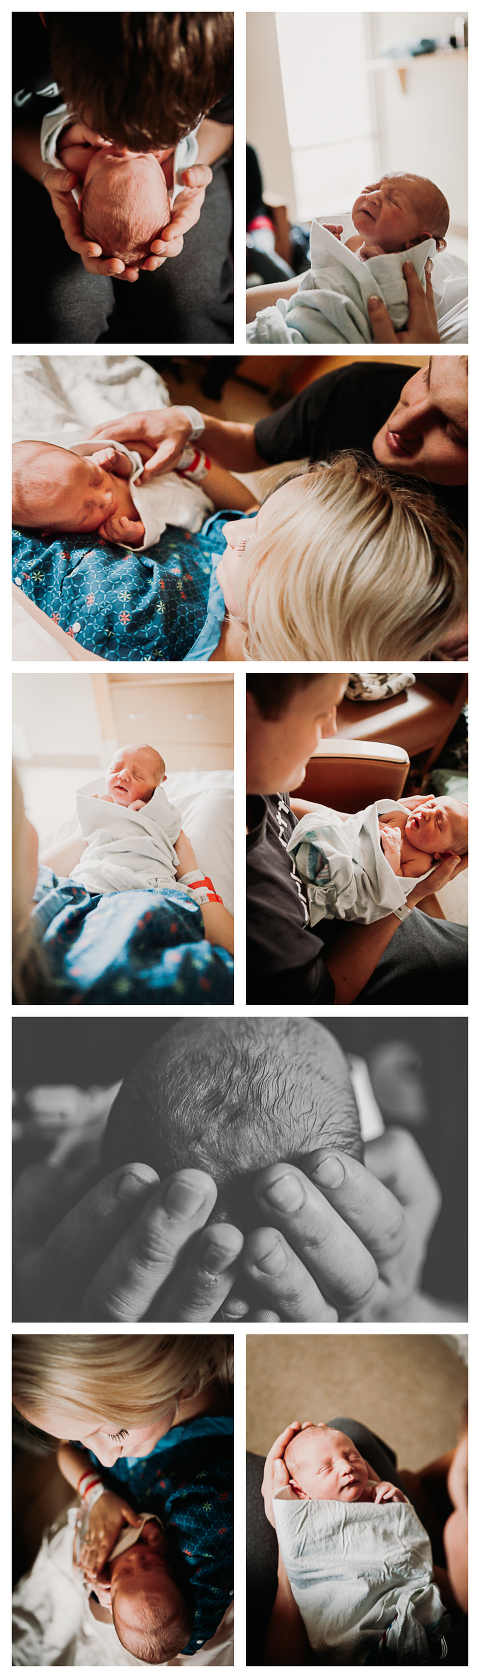 Baby Cayson, lifestyle newborn session at the hospital by Hailey Haberman Photography in Ellensburg WA 